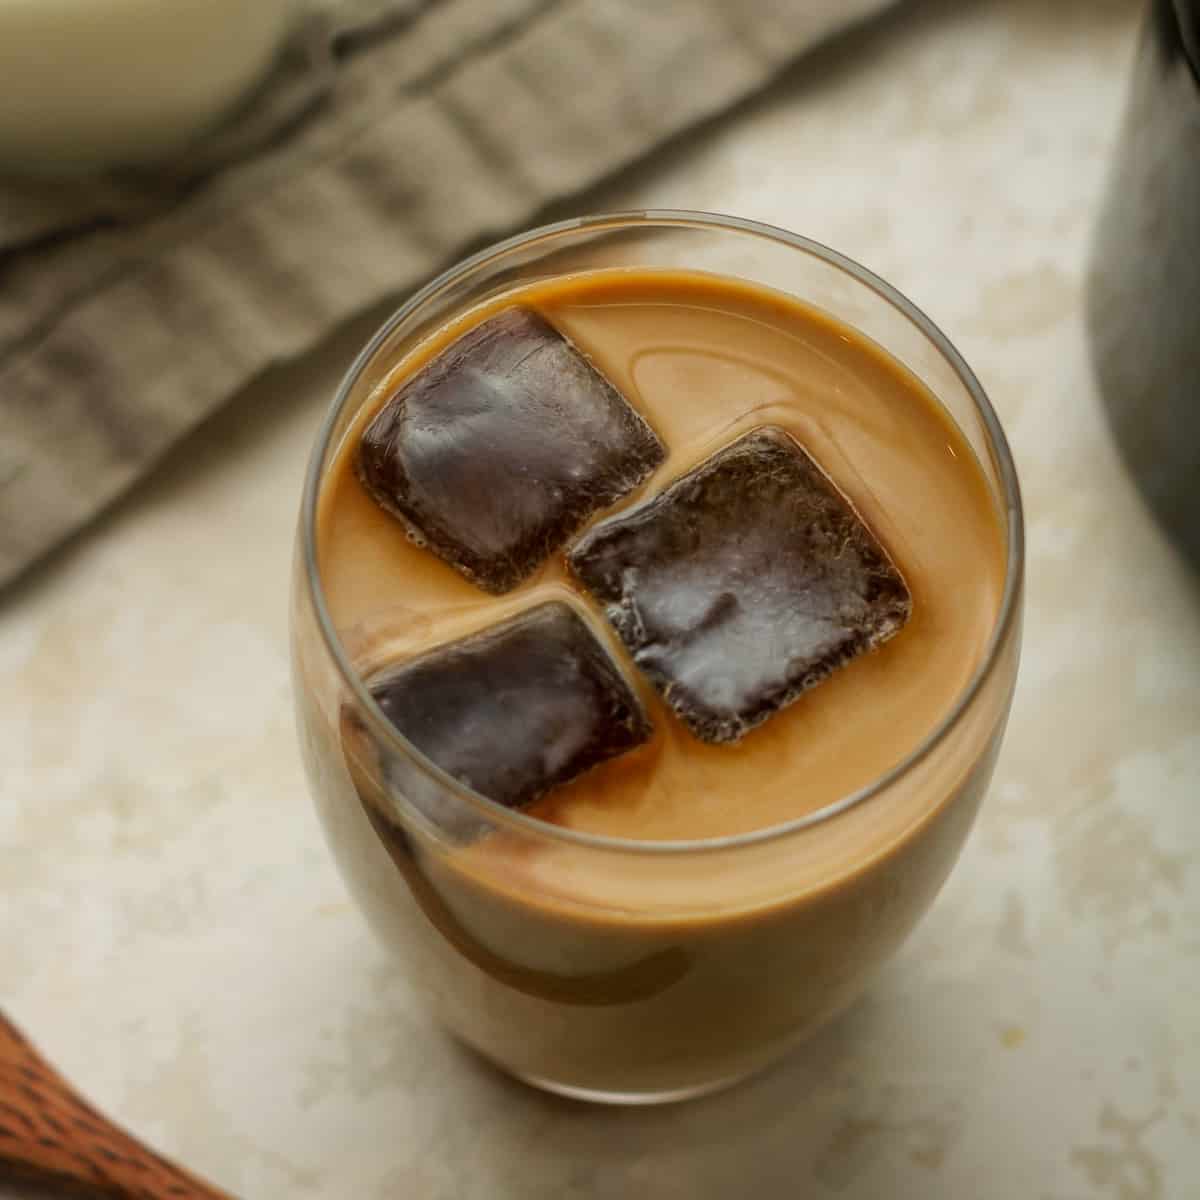 Iced coffee is an all year long kind of thing. : r/nespresso